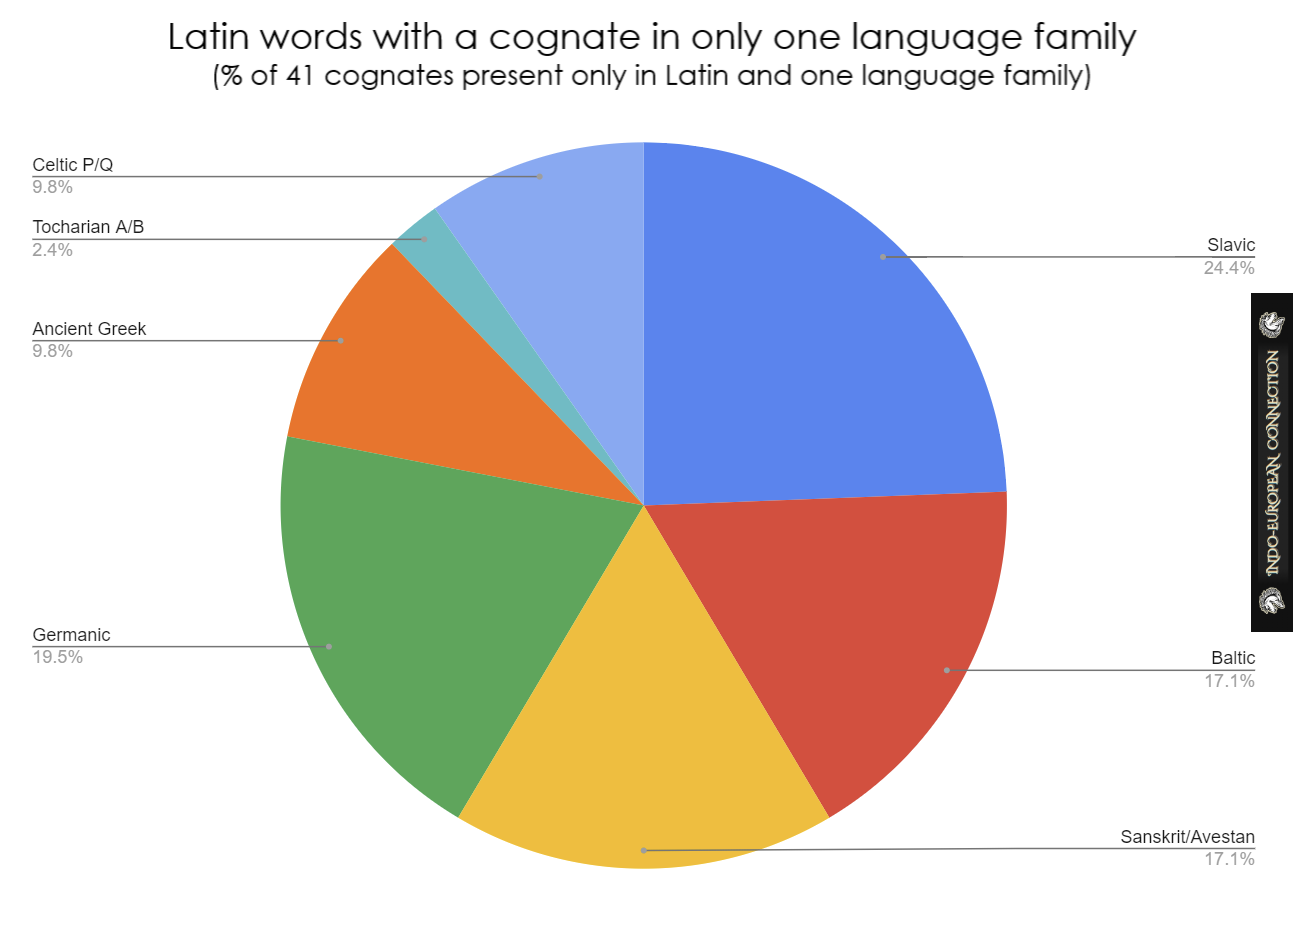 The percentage of cognates common only to one Indo-European language family and Latin language shown on chart with following results Slavic: 24.4%; Baltic: 17.1%; Sanskrit/Avestan: 17.1%; Germanic: 19.5%; Ancient Greek: 9.8%; Tocharian A/B: 2.4%; Celtic P/Q: 9.8%